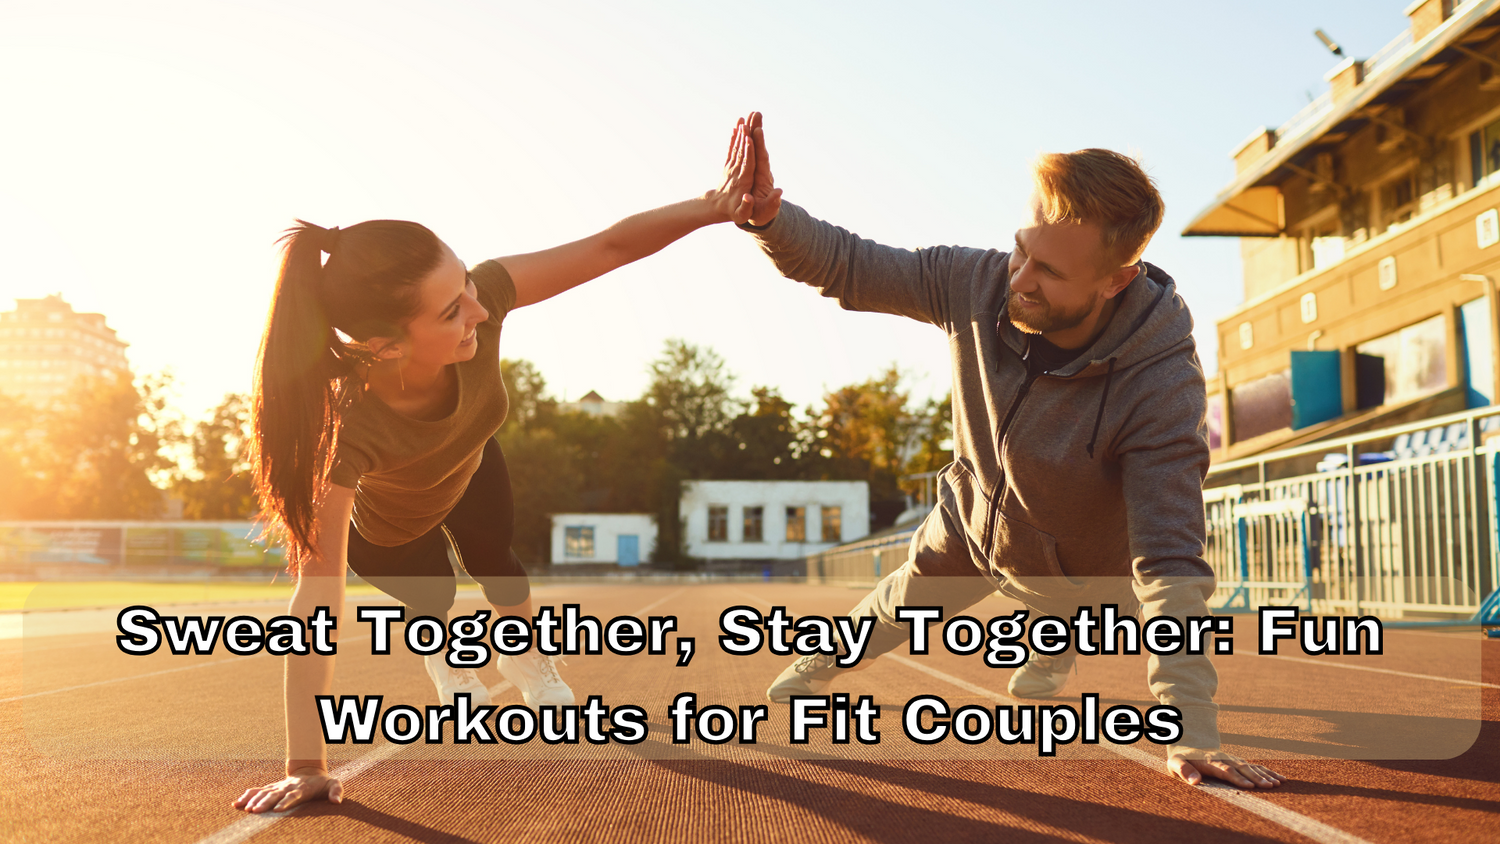 Sweat Together, Stay Together: Fun Workouts for Fit Couples